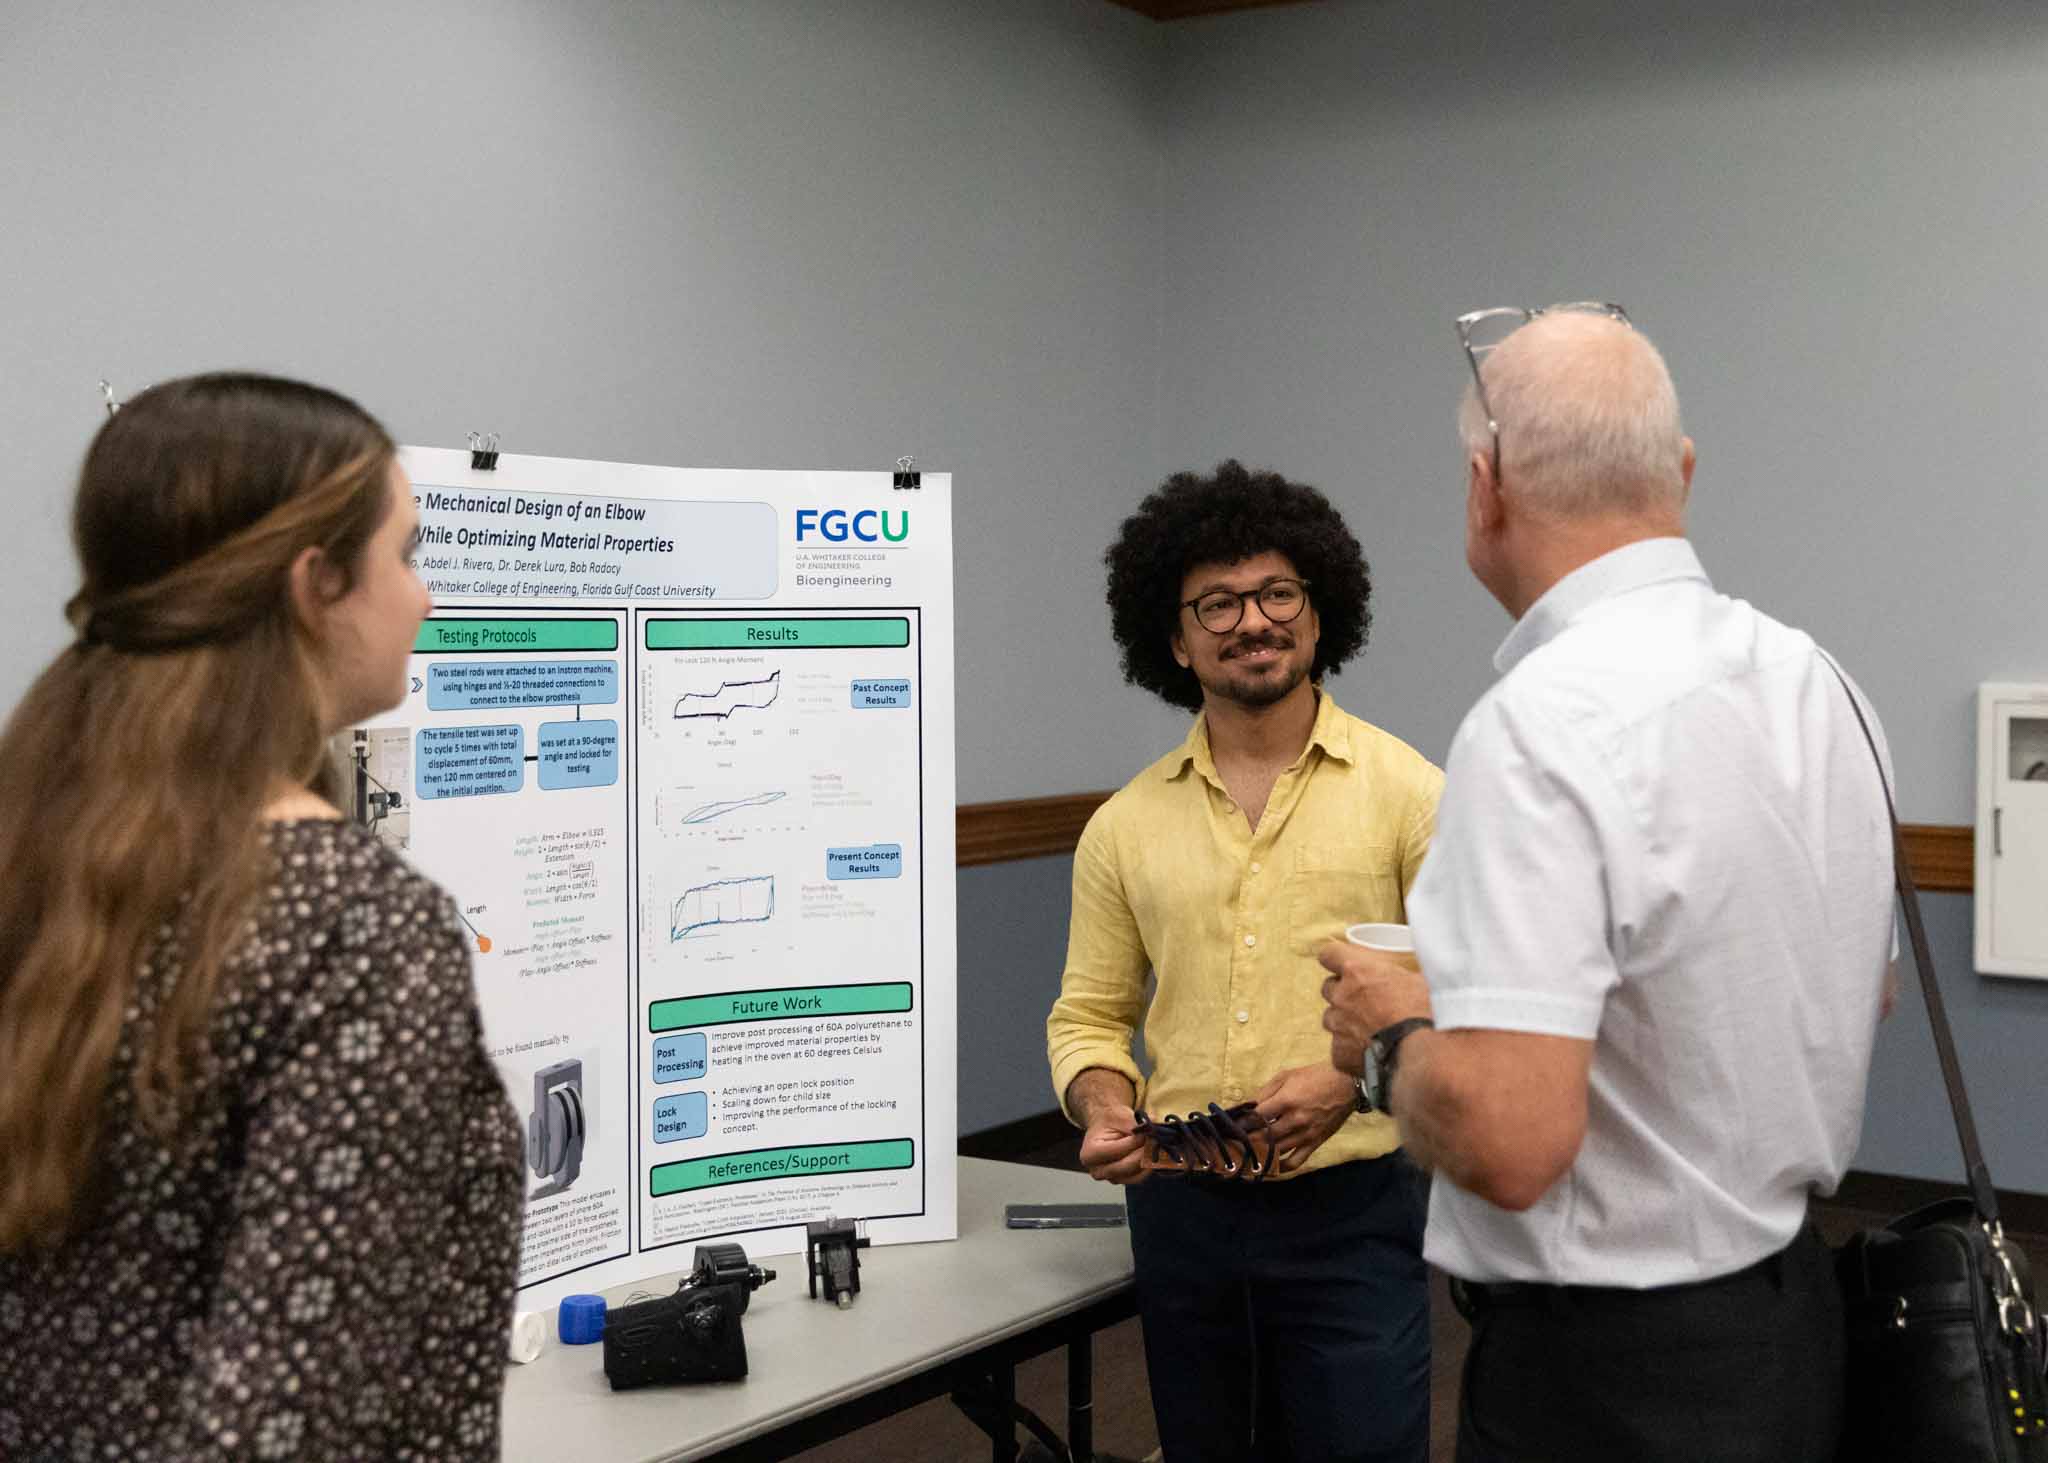 Bioengineering student with curly hair talks about his senior project to a judge.